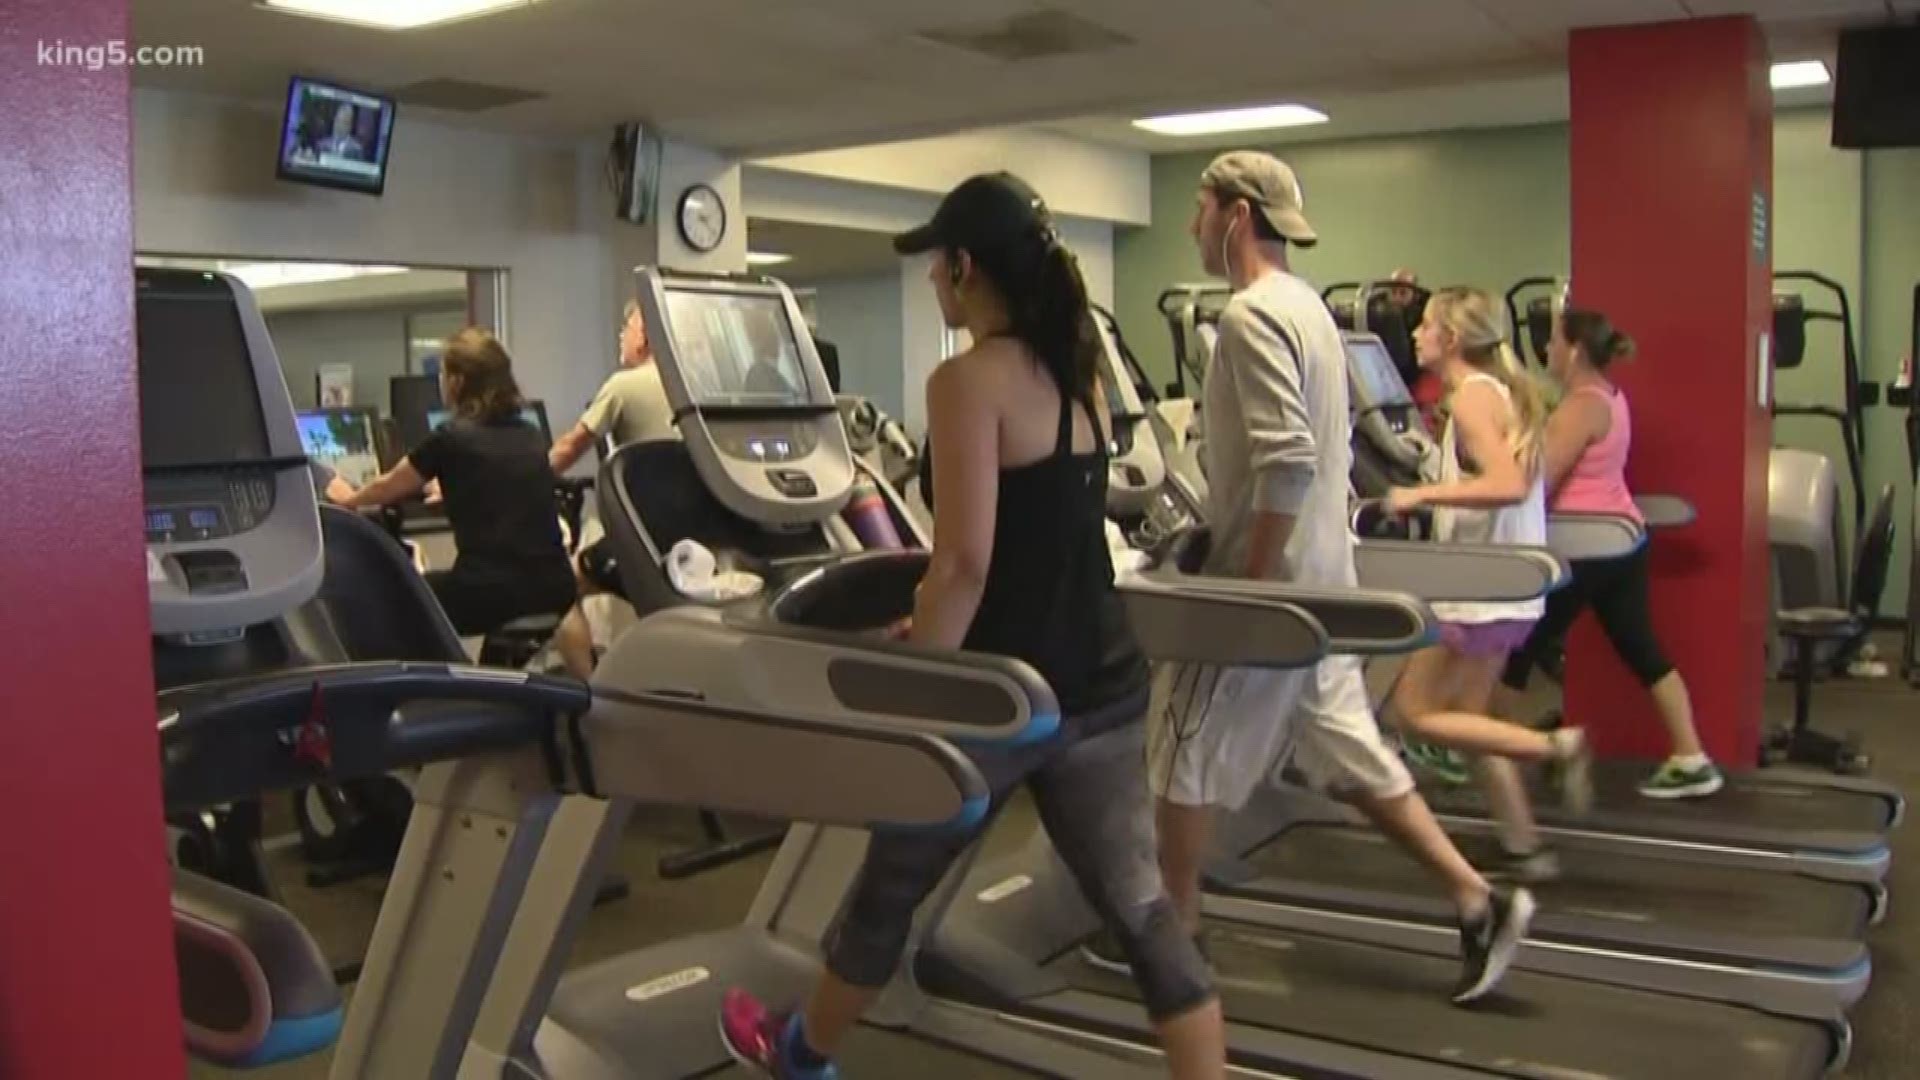 Fred Hutch in Seattle is looking at ways that exercise can reduce the likelihood of breast cancer in women.